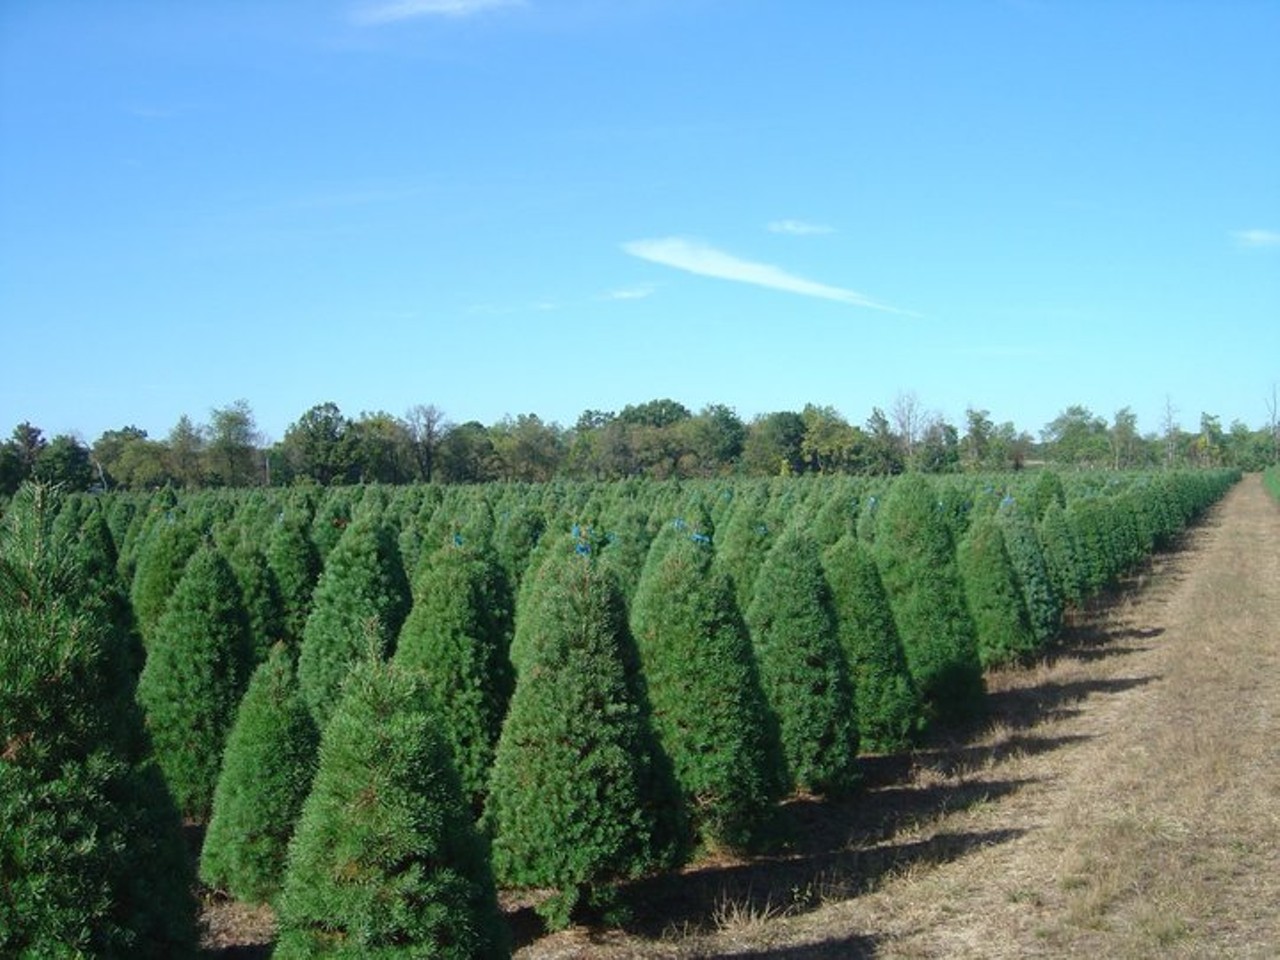 Great Lakes Christmas Tree Farms
1701 E 2nd Ave., Ybor City
All Christmas season
Serving the Tampa Bay area for over 30 years, now at a new Historic Ybor City location, Great Lakes Christmas Tree Farms provides hundreds of varying trees such as blue spruce, douglas fir, and black hill spruce. Great Lakes also offers wreaths, decorated mini christmas trees or holly plants, and poinsettias. Online ordering and delivery is available.